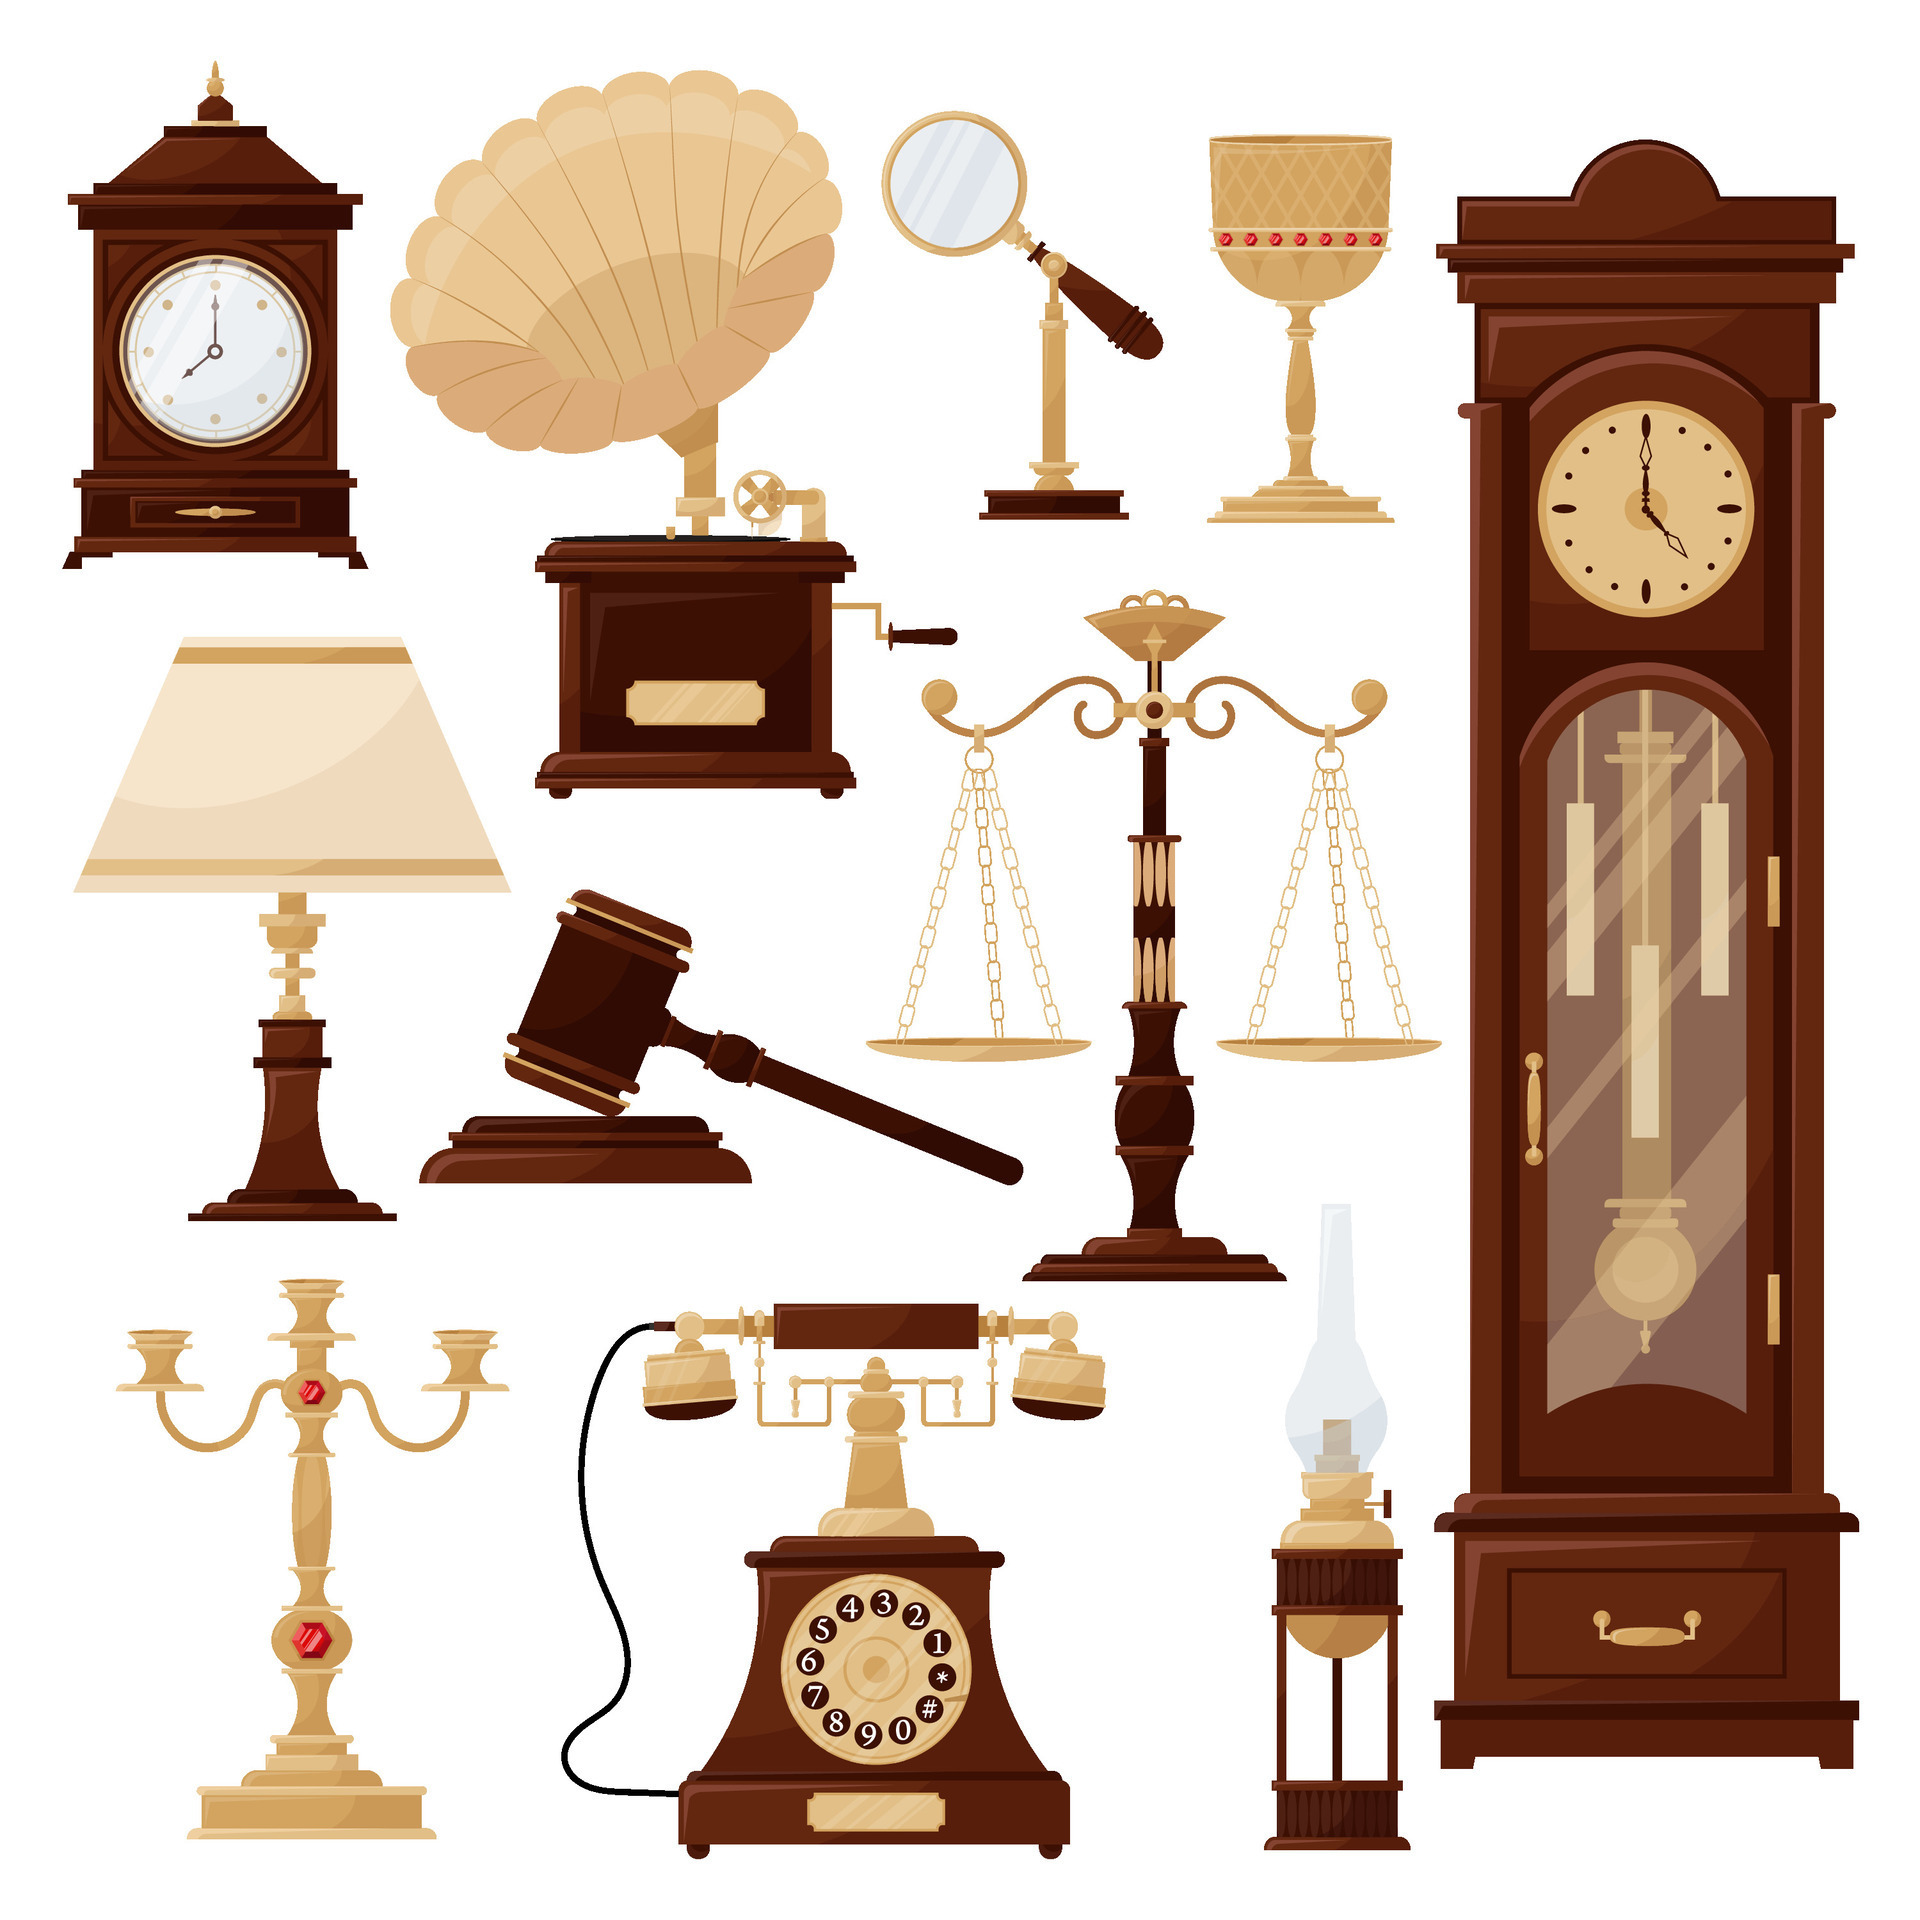 Antiques, old things, vintage. Set of vector illustrations of antique ...